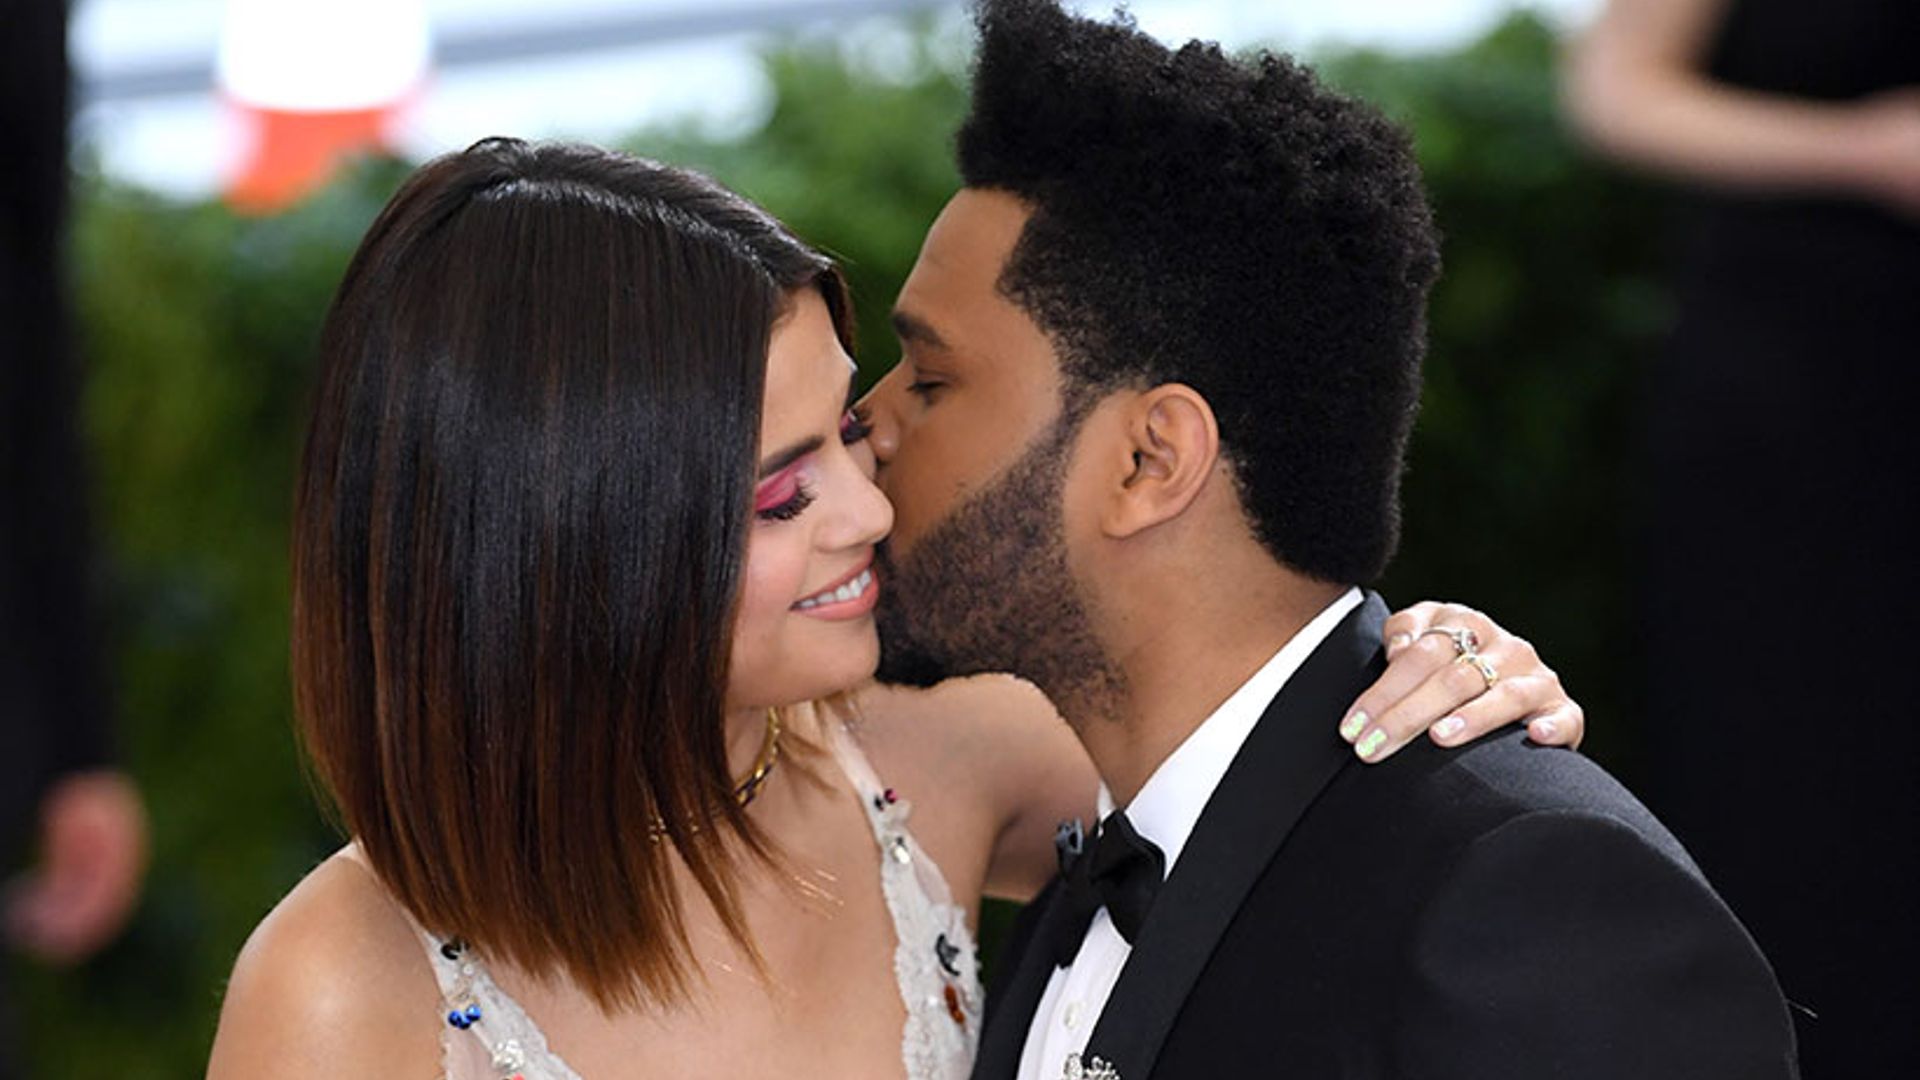 Selena Gomez and The Weeknd have a romantic date night in New York